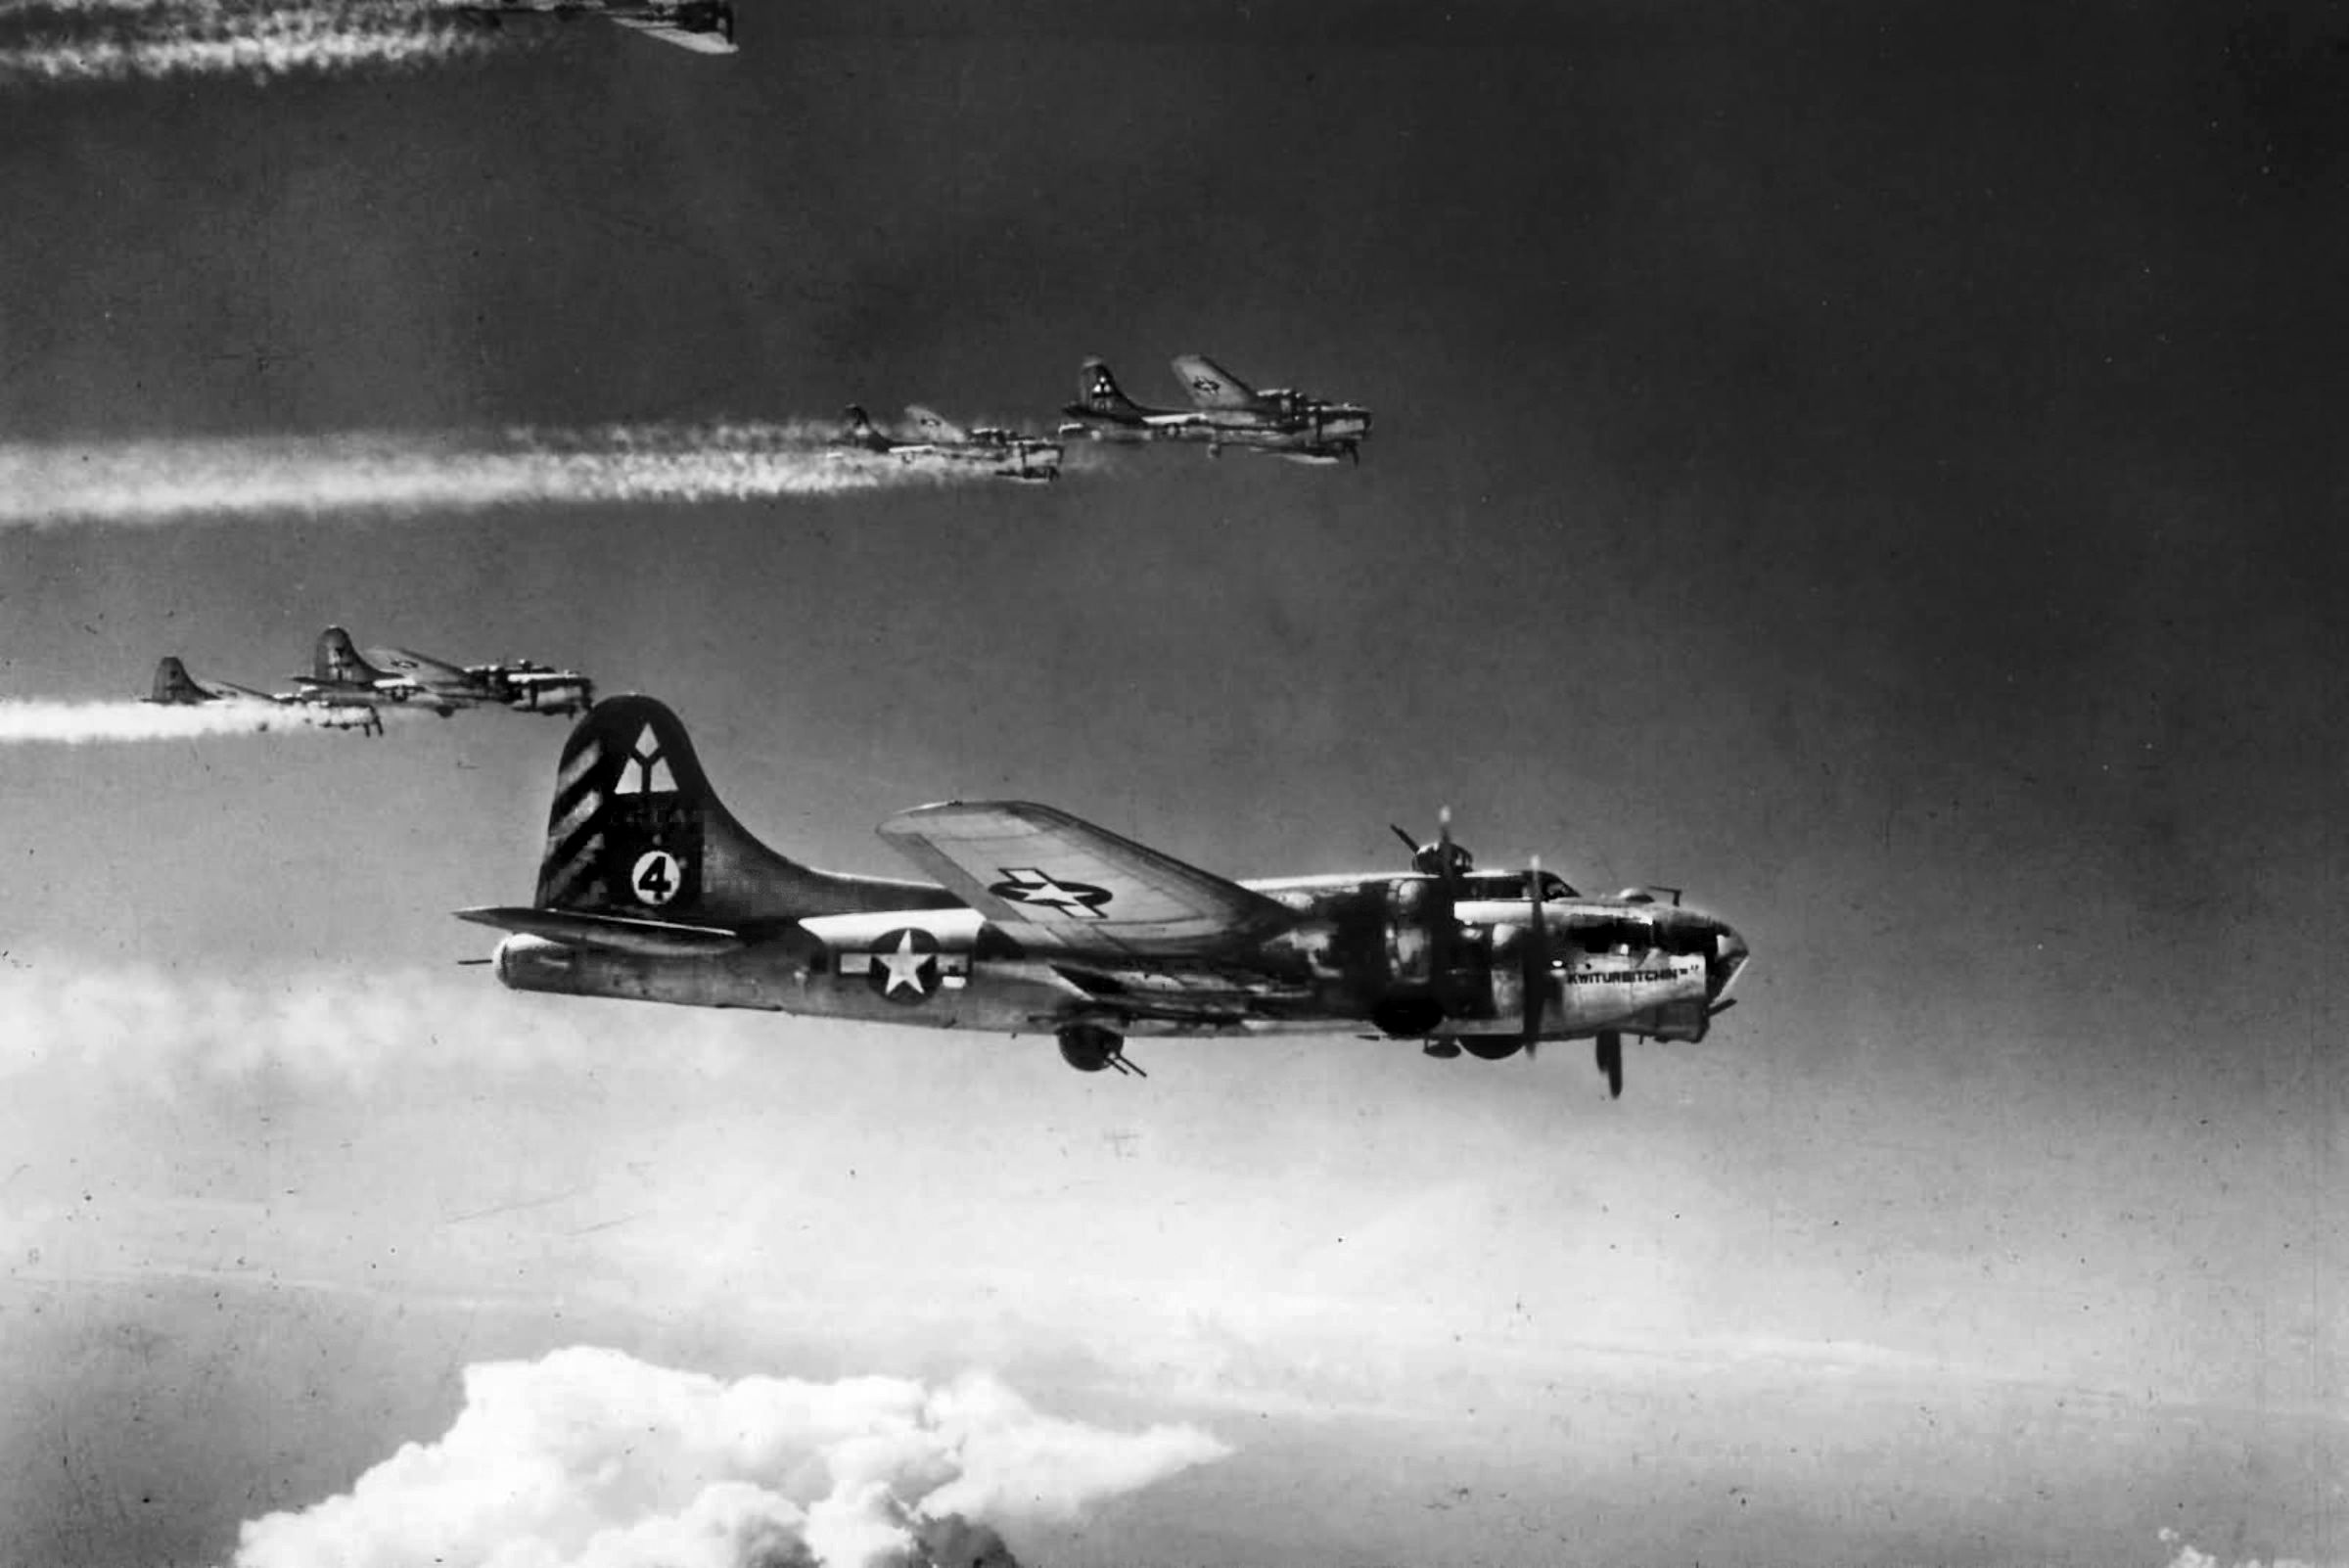 Based at Foggia, Italy, in 1944, B-17 44-6544 “Kwitchurbitchin II” flies in formation with other B-17s of the 97th Bomb Group on a bombing run.